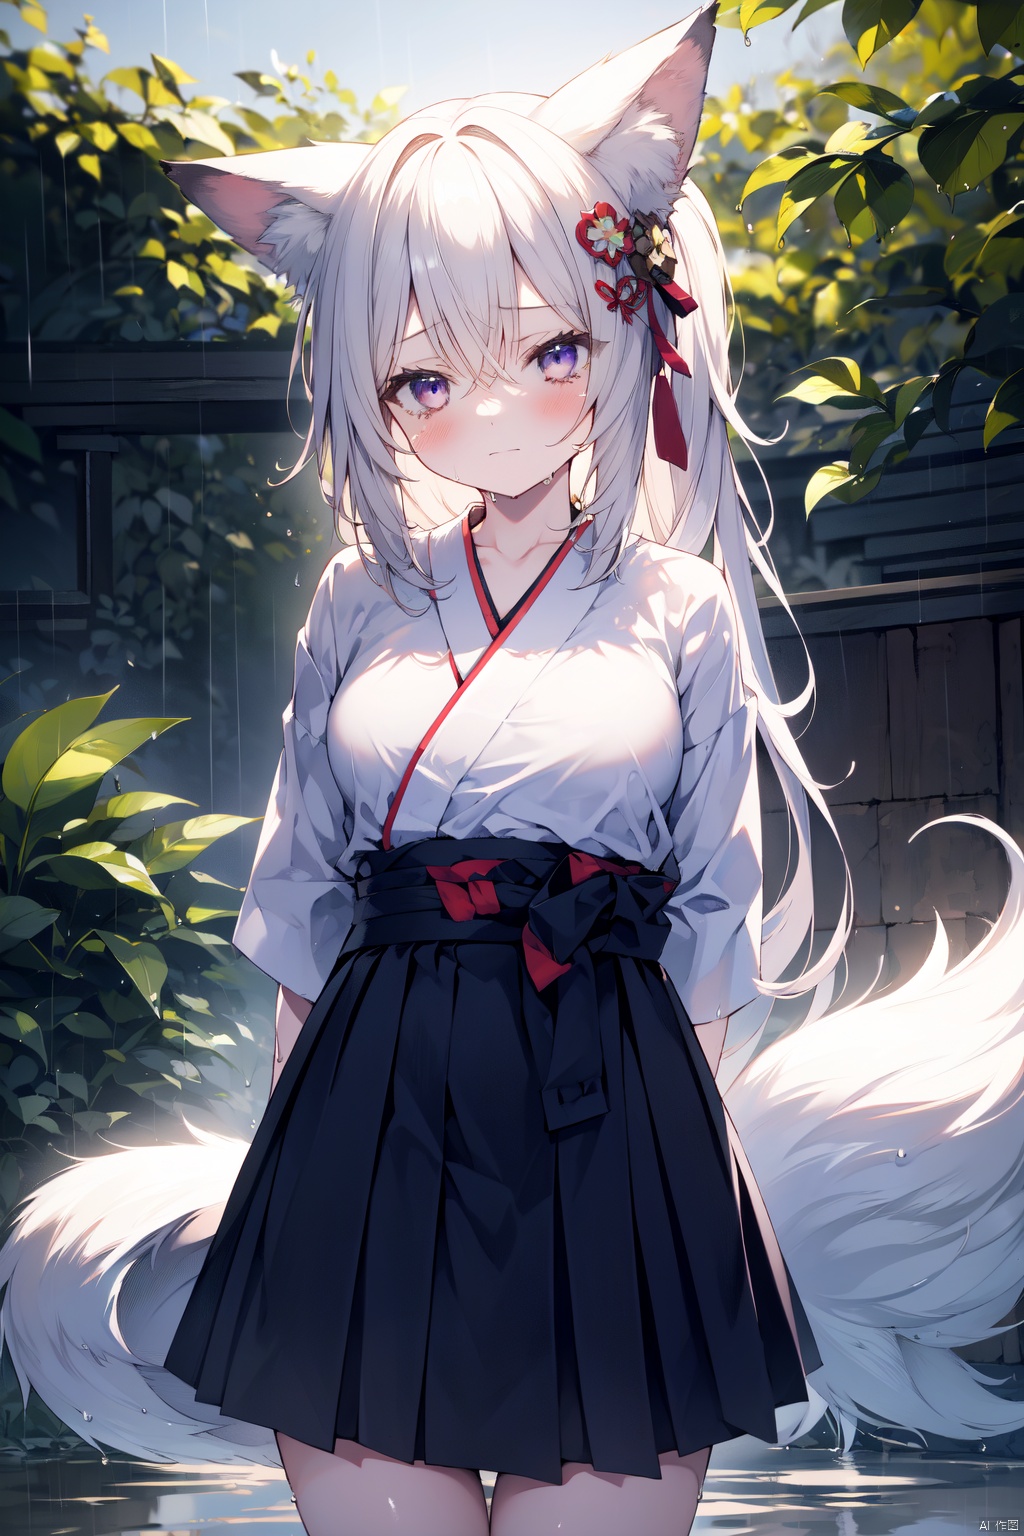  1girl, japanese_clothes, rain, fox_ears, solo, white_kimono, animal_ears, folded_ponytail, hakama, fox_tail, fox_girl, red_hakama, purple_eyes, tail, skirt, hakama_skirt, tears, kimono, hair_between_eyes, long_hair, crying, blush, bangs, outdoors, miko, animal_ear_fluff, crying_with_eyes_open, arms_behind_back, wet_clothes, long_sleeves, closed_mouth, white_hair, wet, looking_at_viewer, standing, hair_ornament, hair_ribbon, very_long_hair, Girl